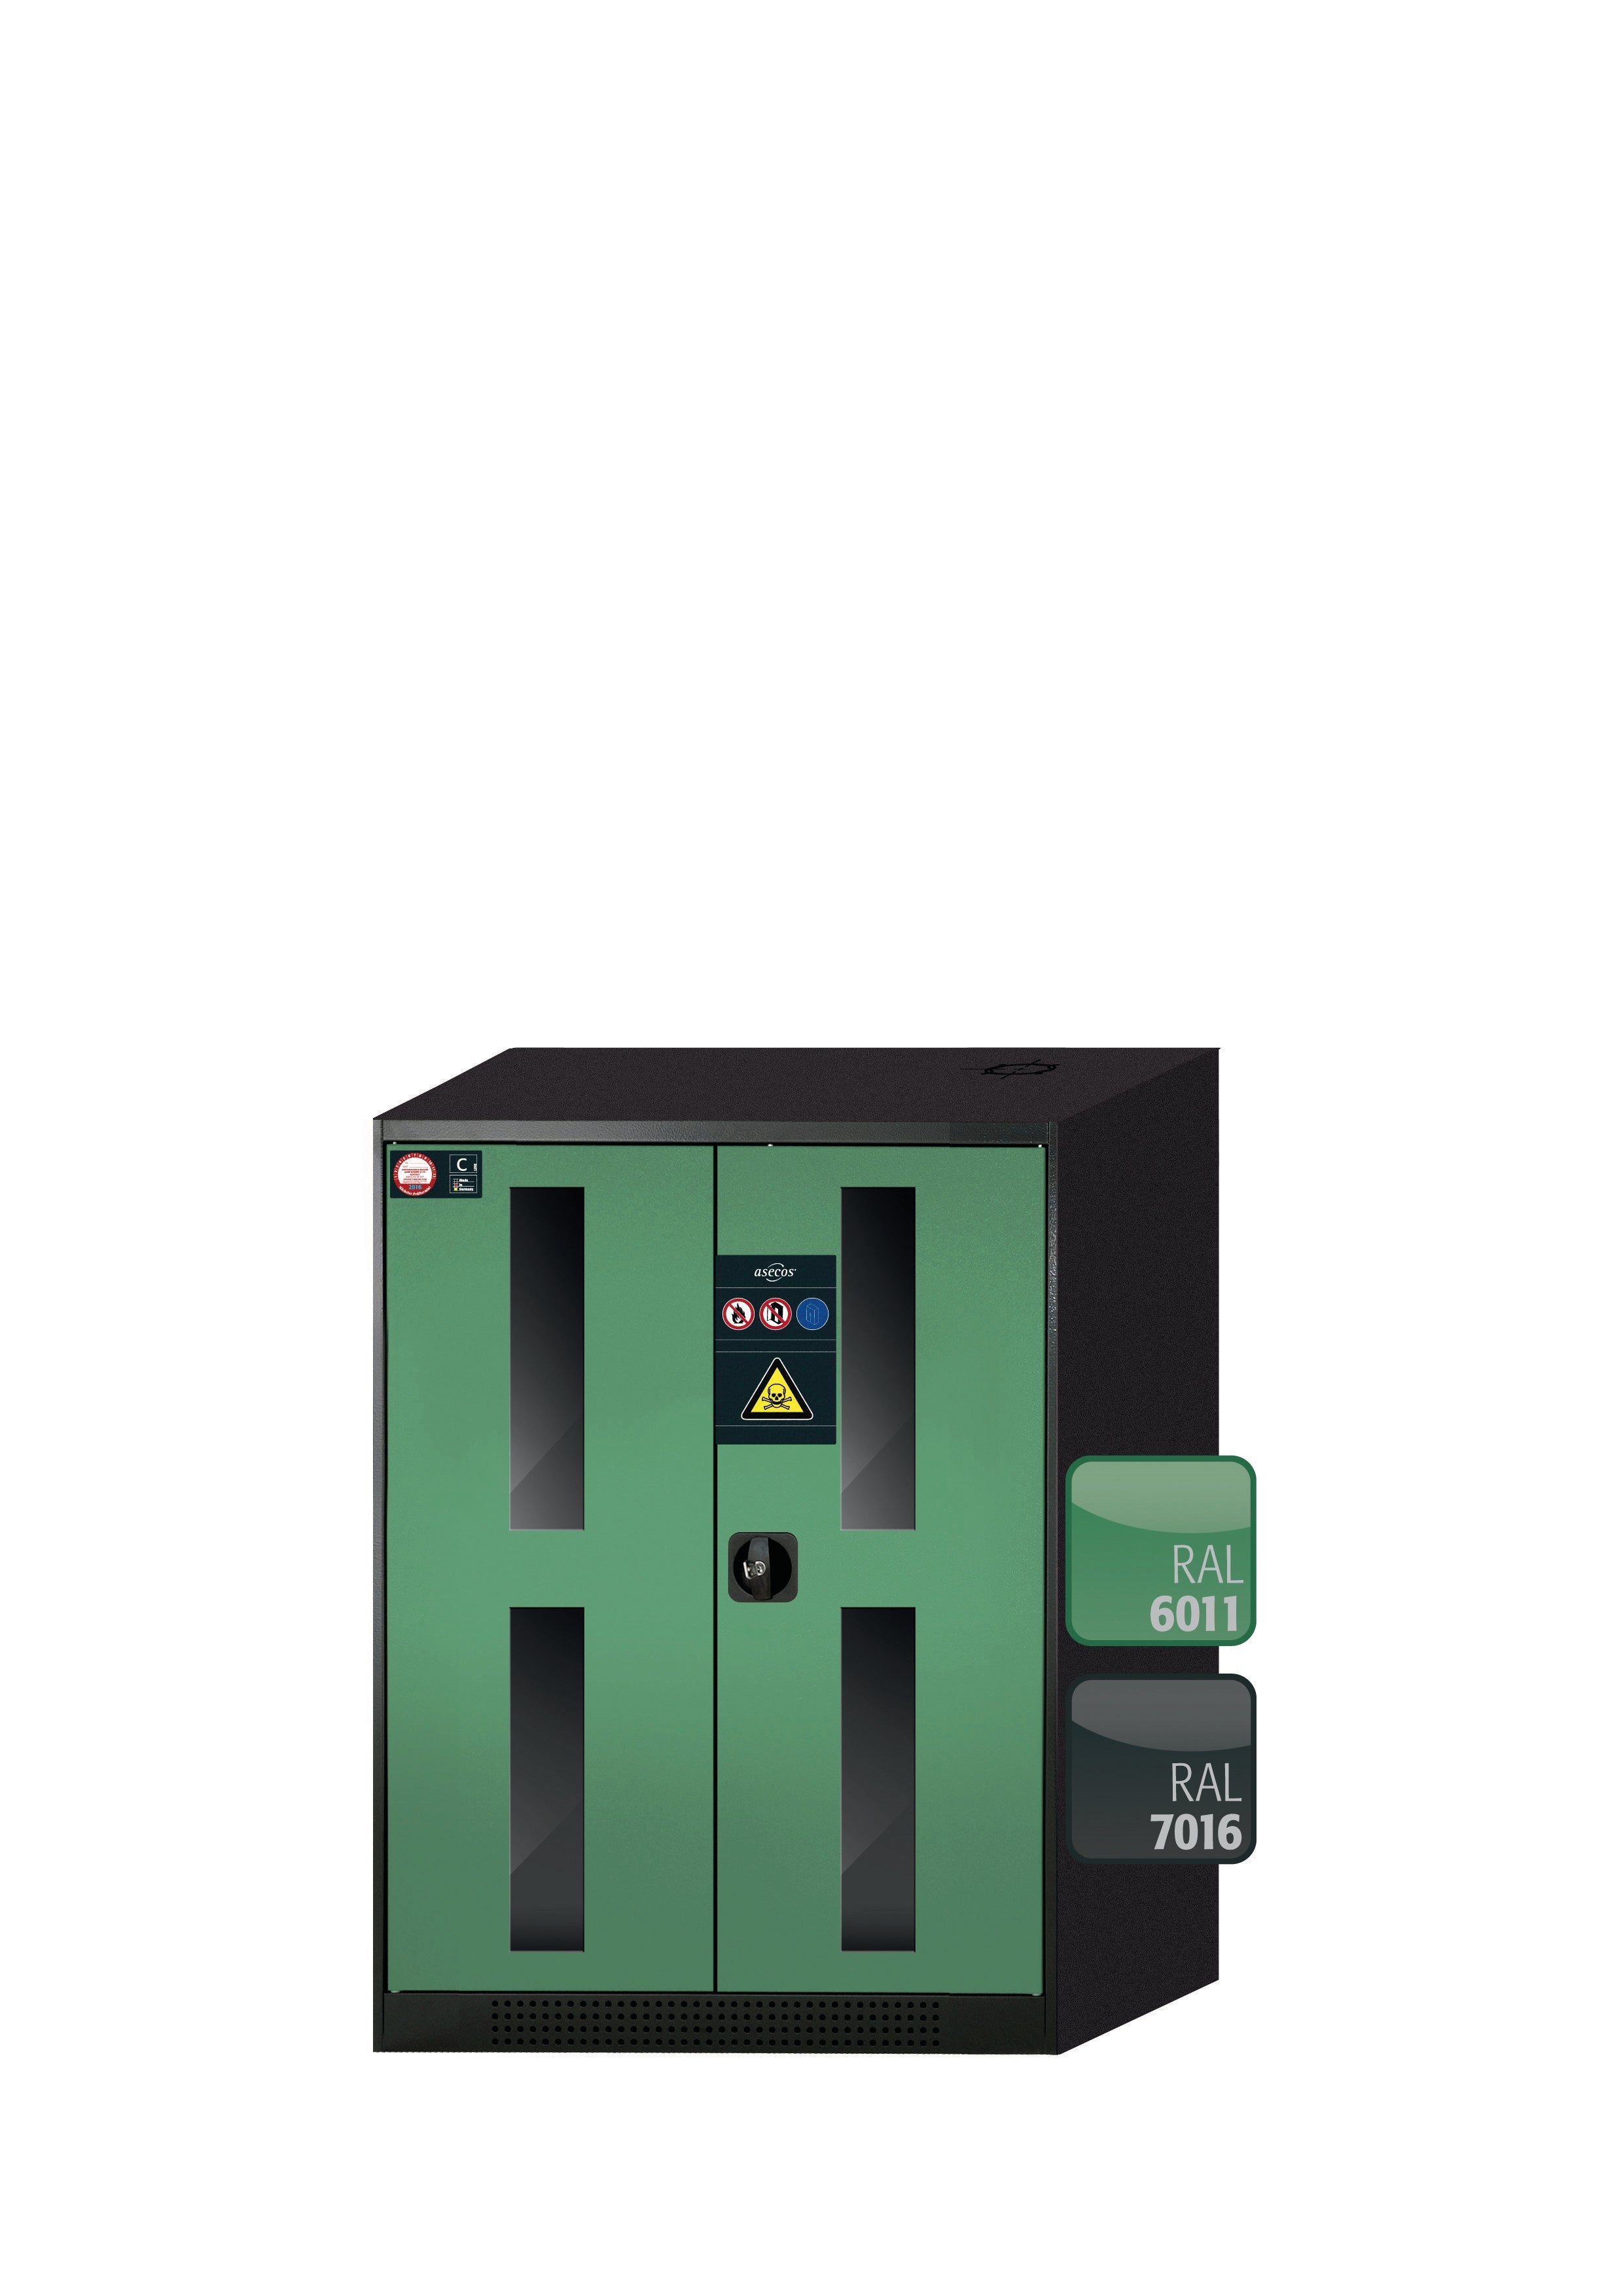 Chemical cabinet CS-CLASSIC-G model CS.110.081.WDFW in reseda green RAL 6011 with 2x standard shelves (sheet steel)